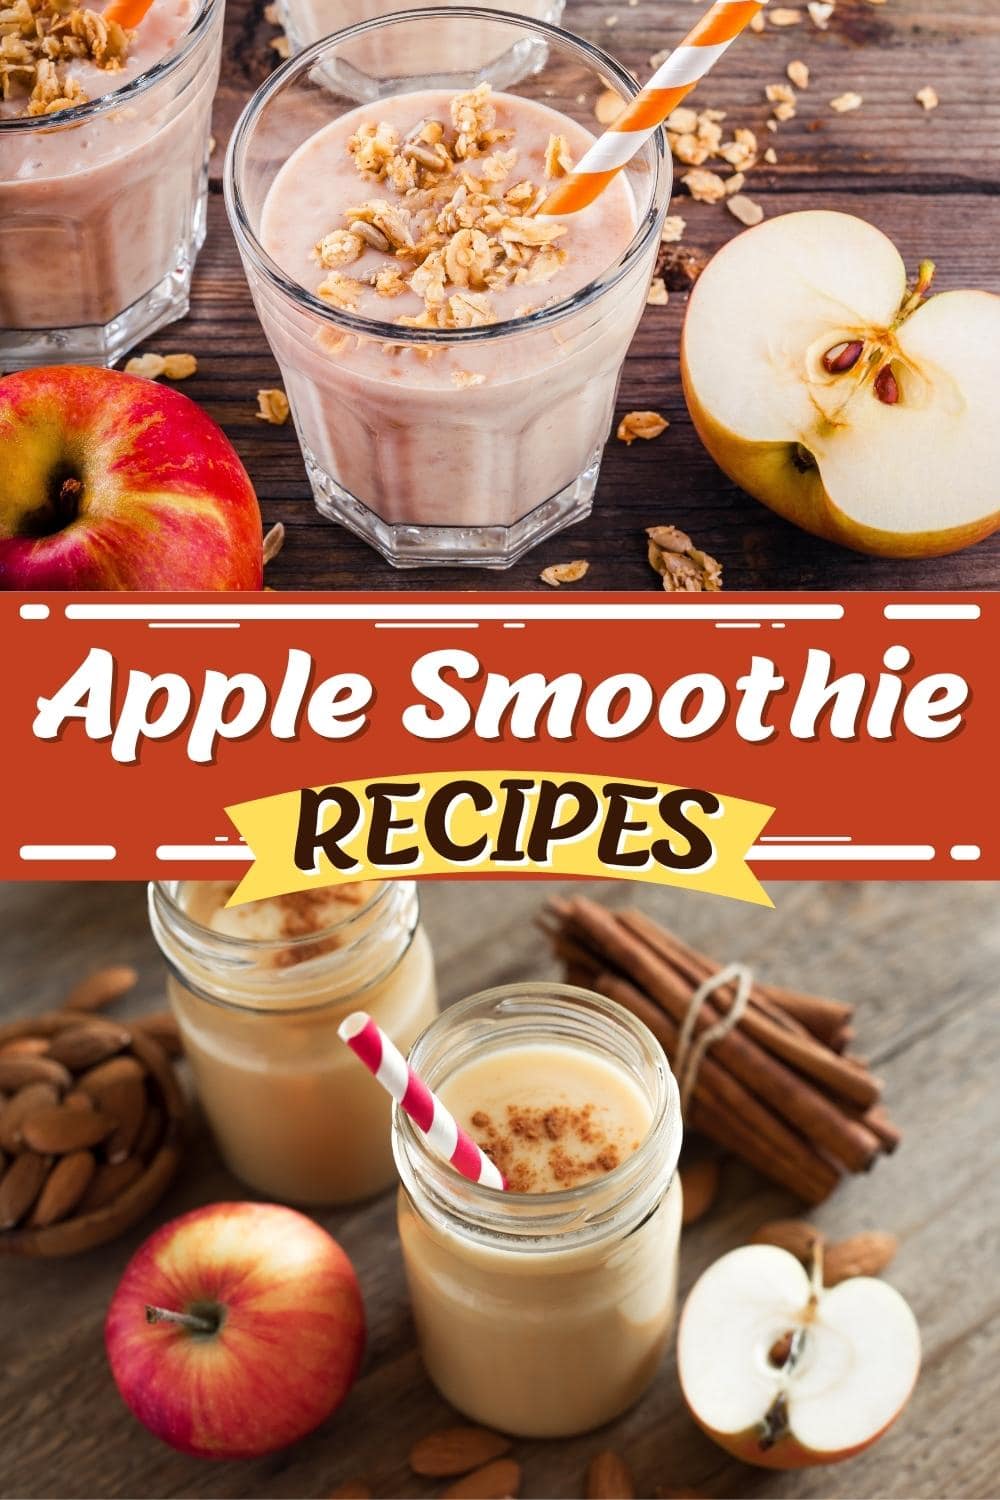 10 Simple Apple Smoothie Recipes You'll Love - Insanely Good